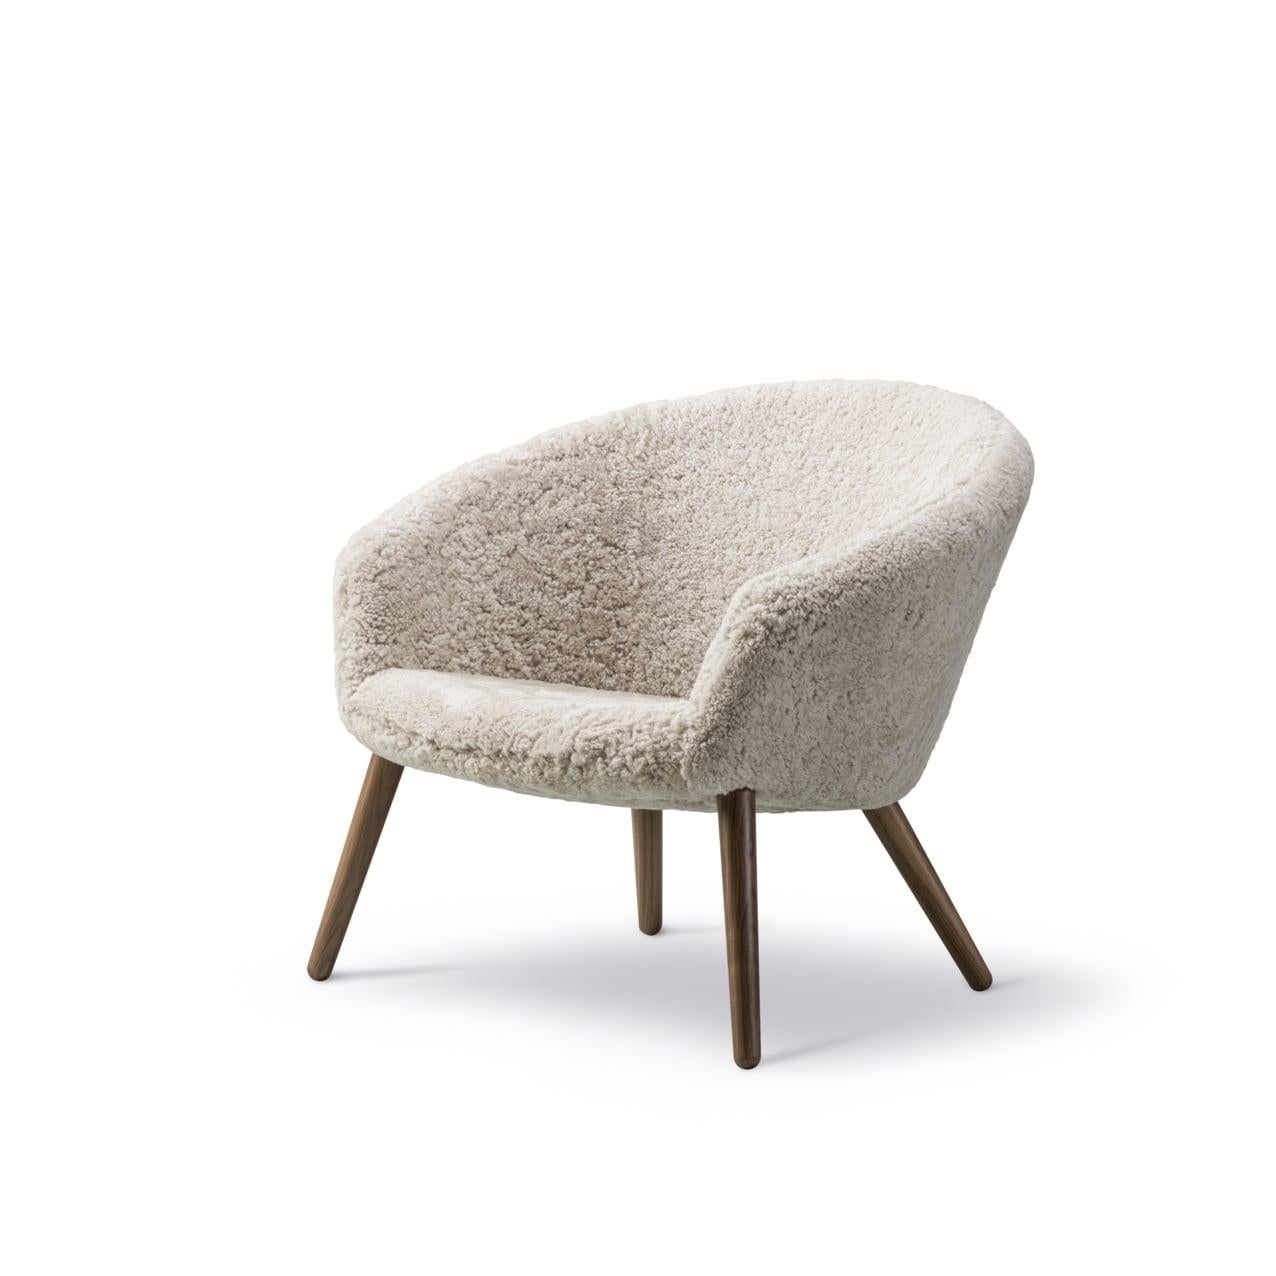 Danish Ditzel Lounge Chair in Moonlight Sheepskin / Lacquered Walnut for Fredericia For Sale